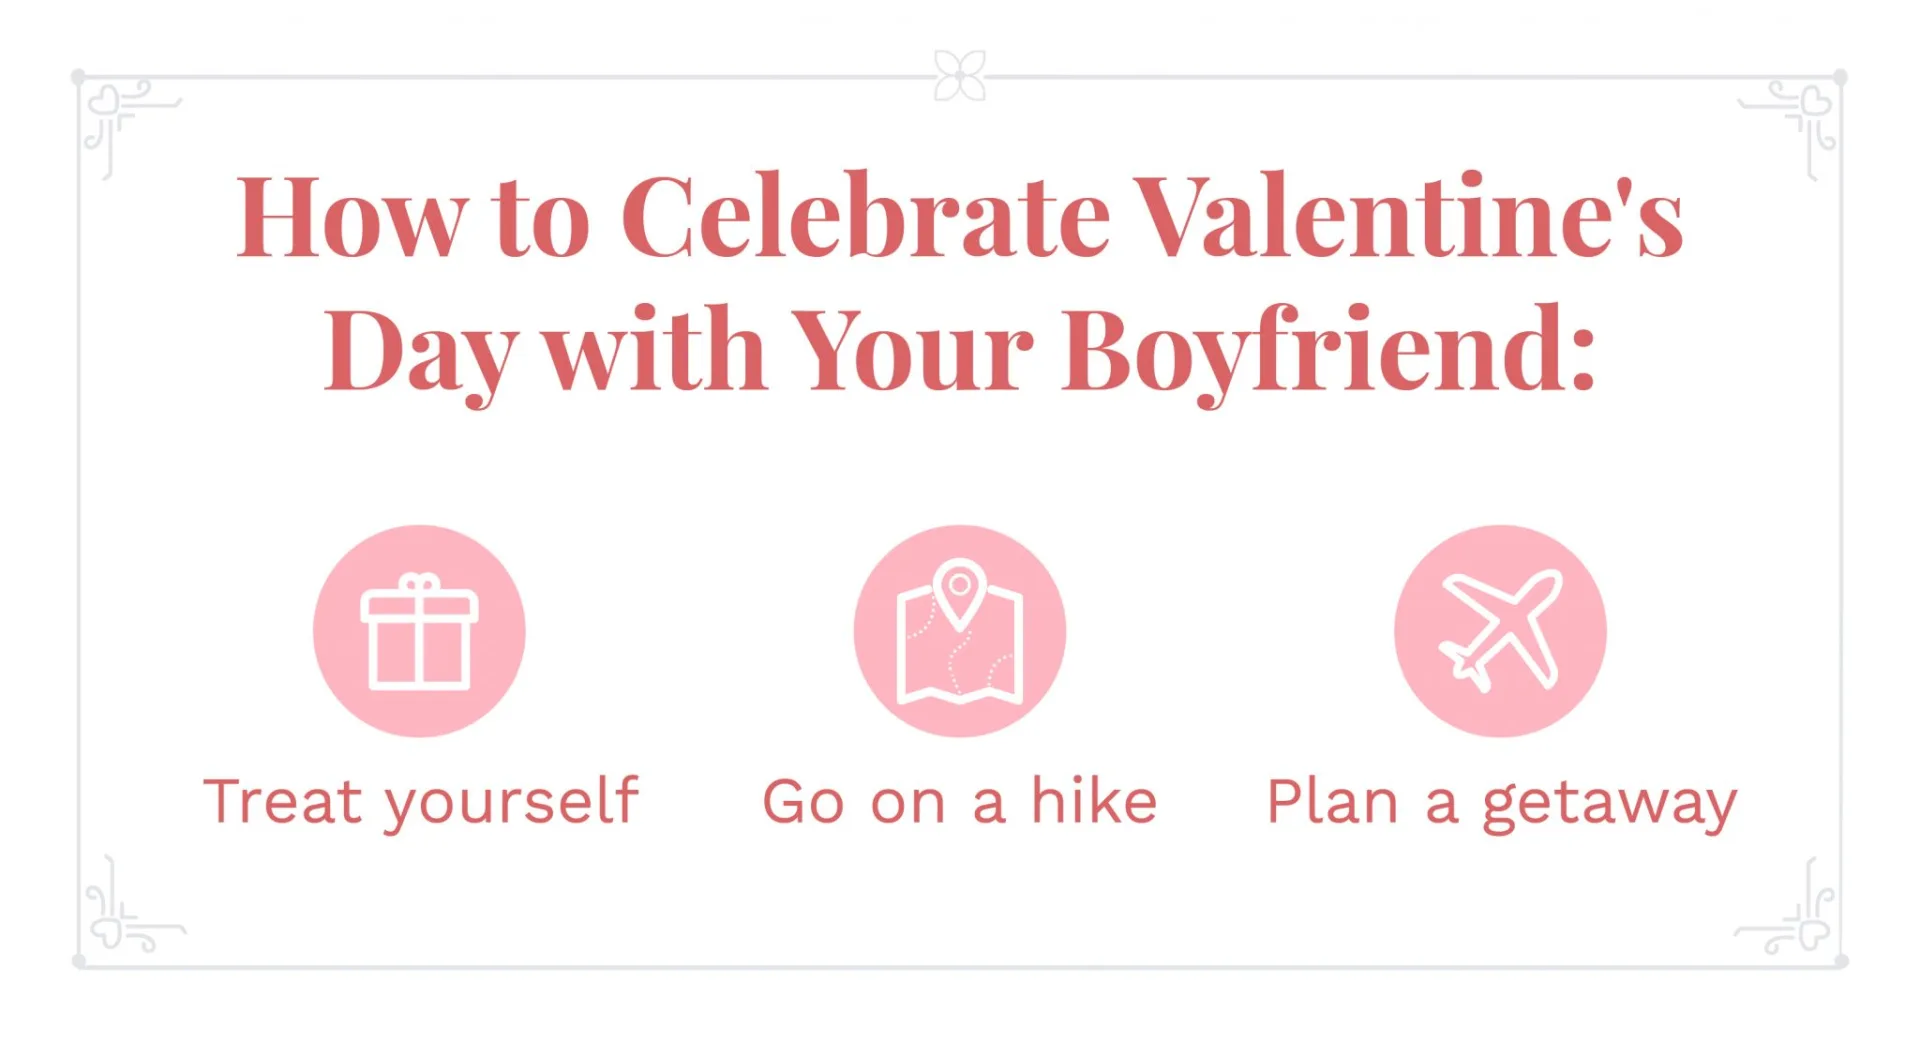 What to Get Your Boyfriend for Valentine’s Day